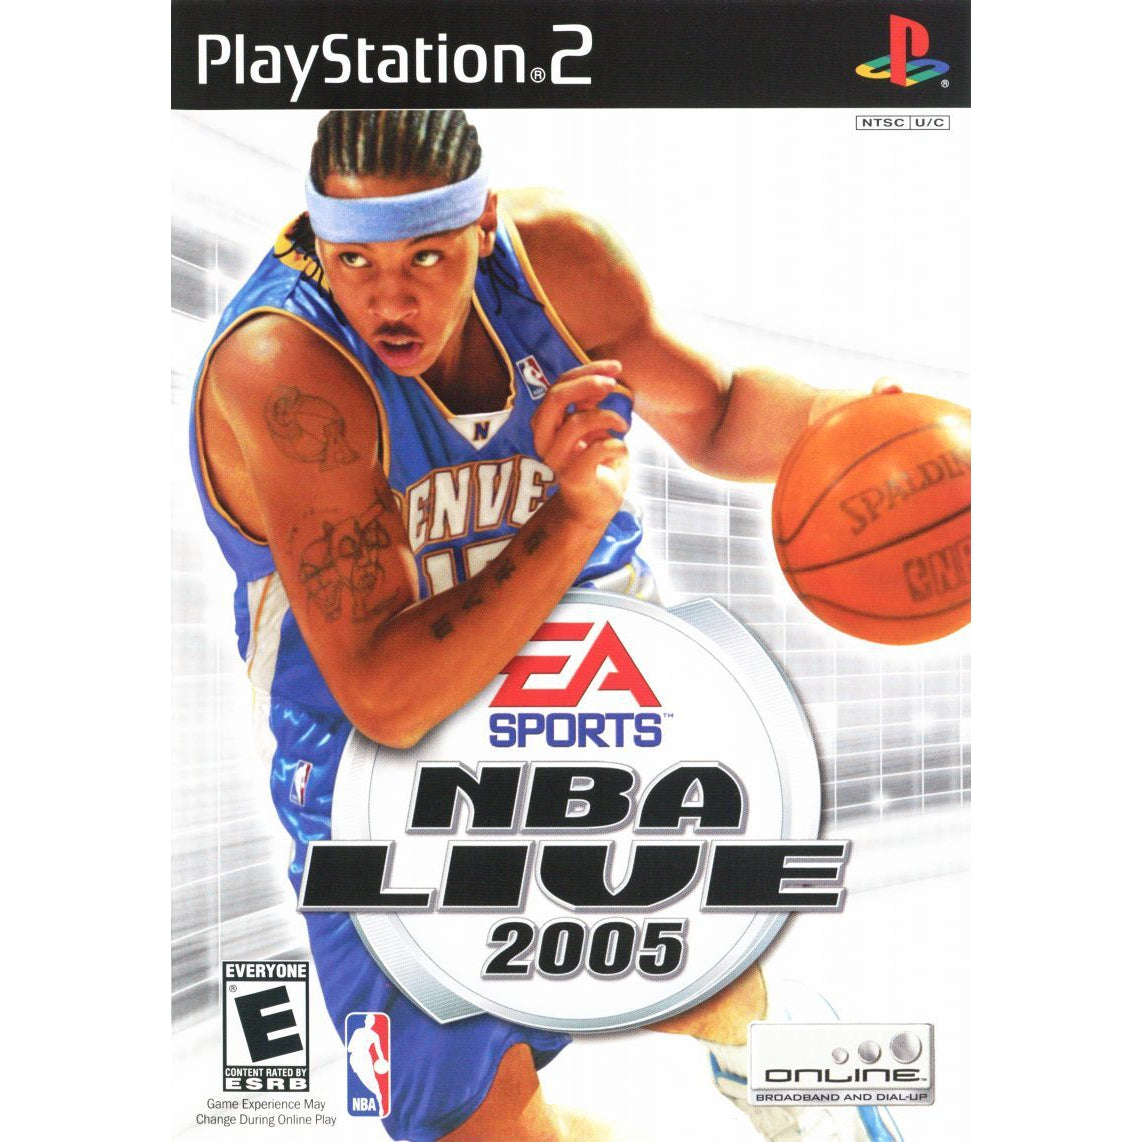 NBA Live 2005 - PlayStation 2 (PS2) Game - YourGamingShop.com - Buy, Sell, Trade Video Games Online. 120 Day Warranty. Satisfaction Guaranteed.